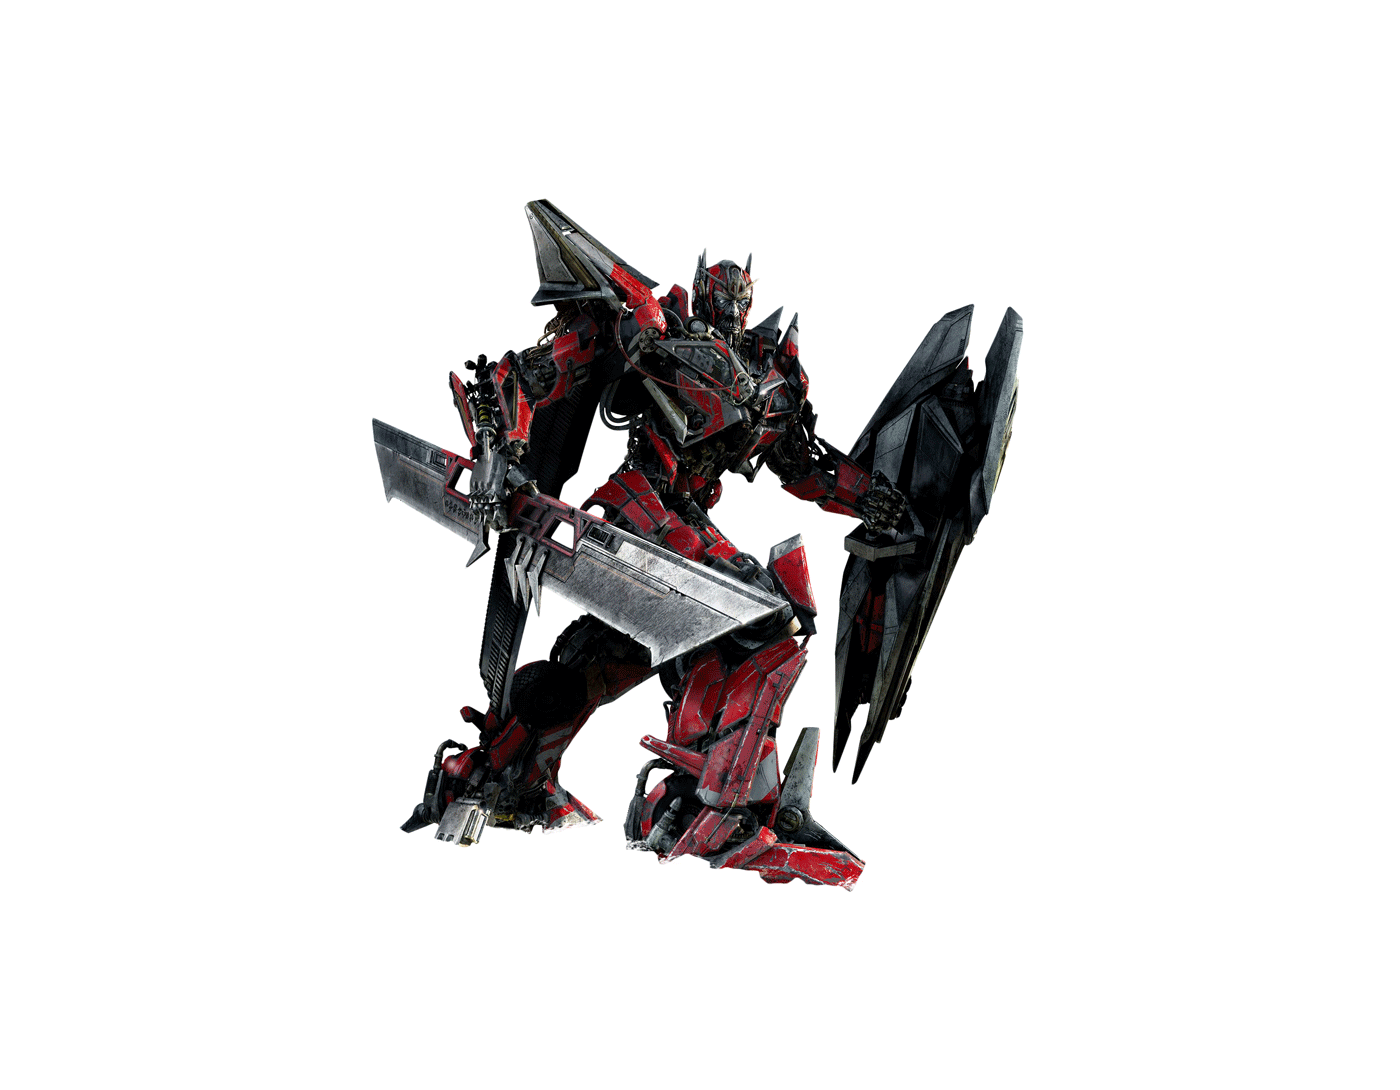 mobile action Printing ads fire Transformers adobe photoshop wacom